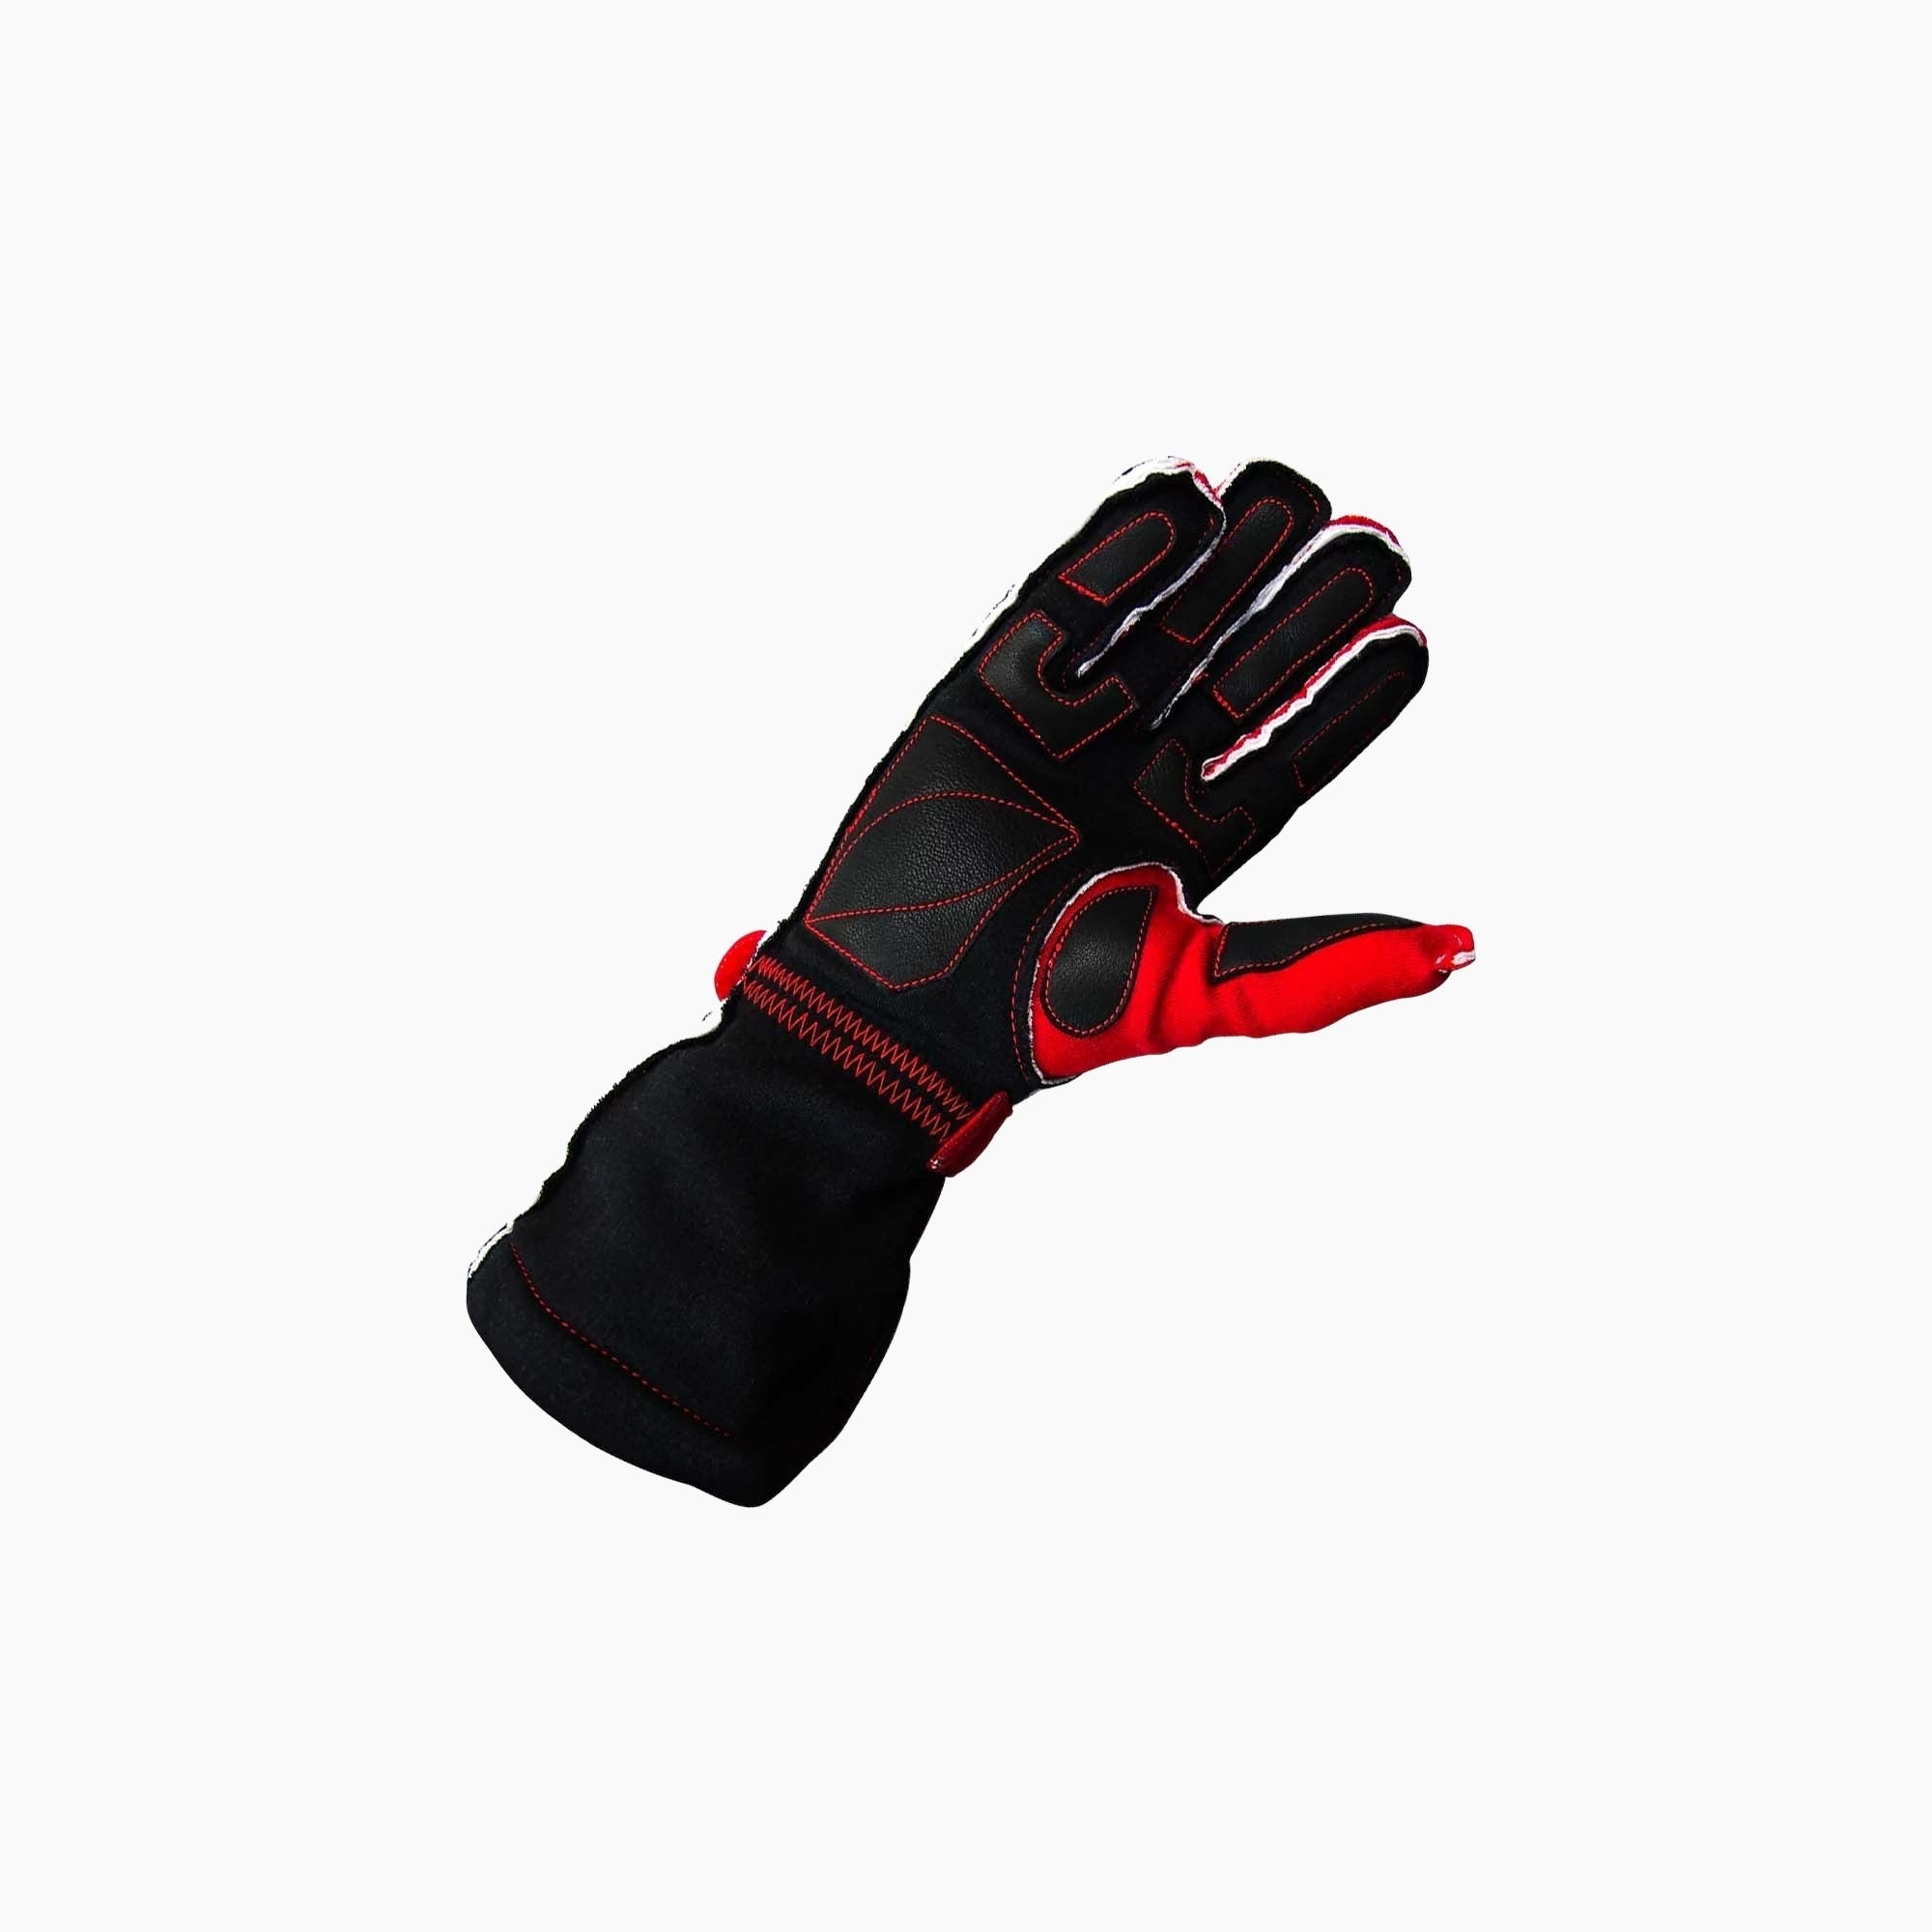 Stand 21 | Porsche Motorsports OS II Racing Gloves-Racing Gloves-STAND 21-gpx-store